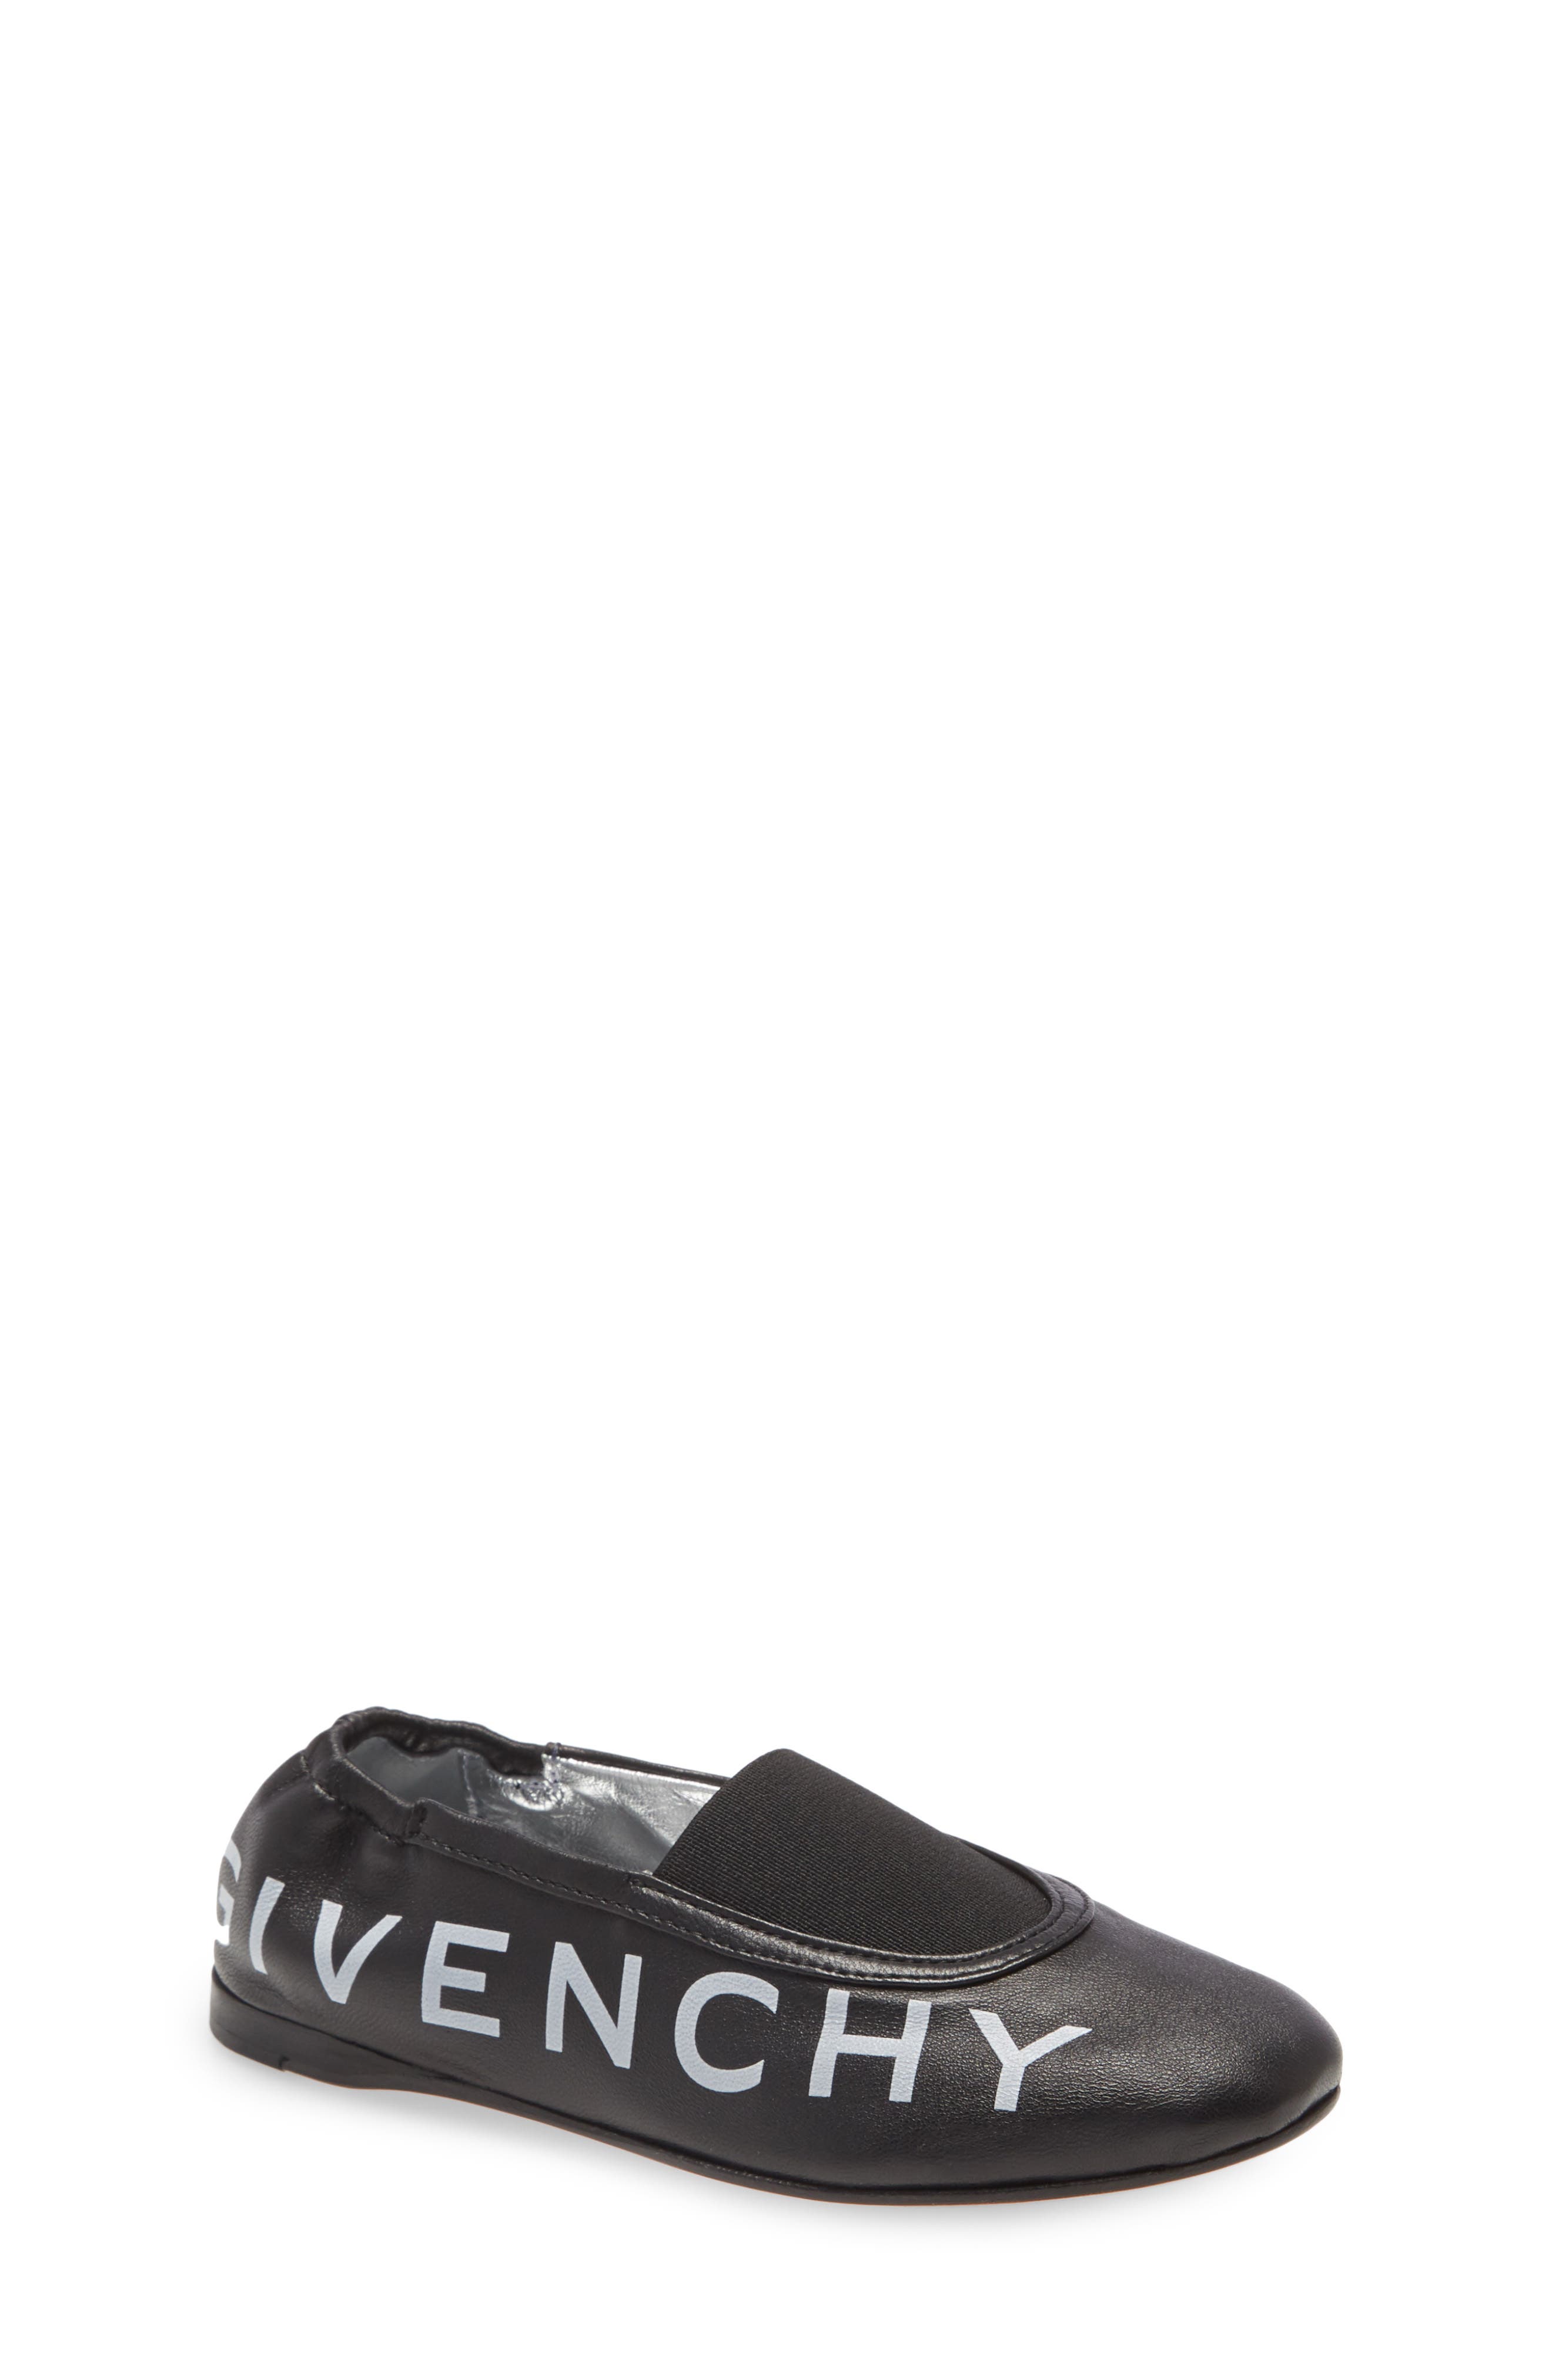 givenchy kid shoes